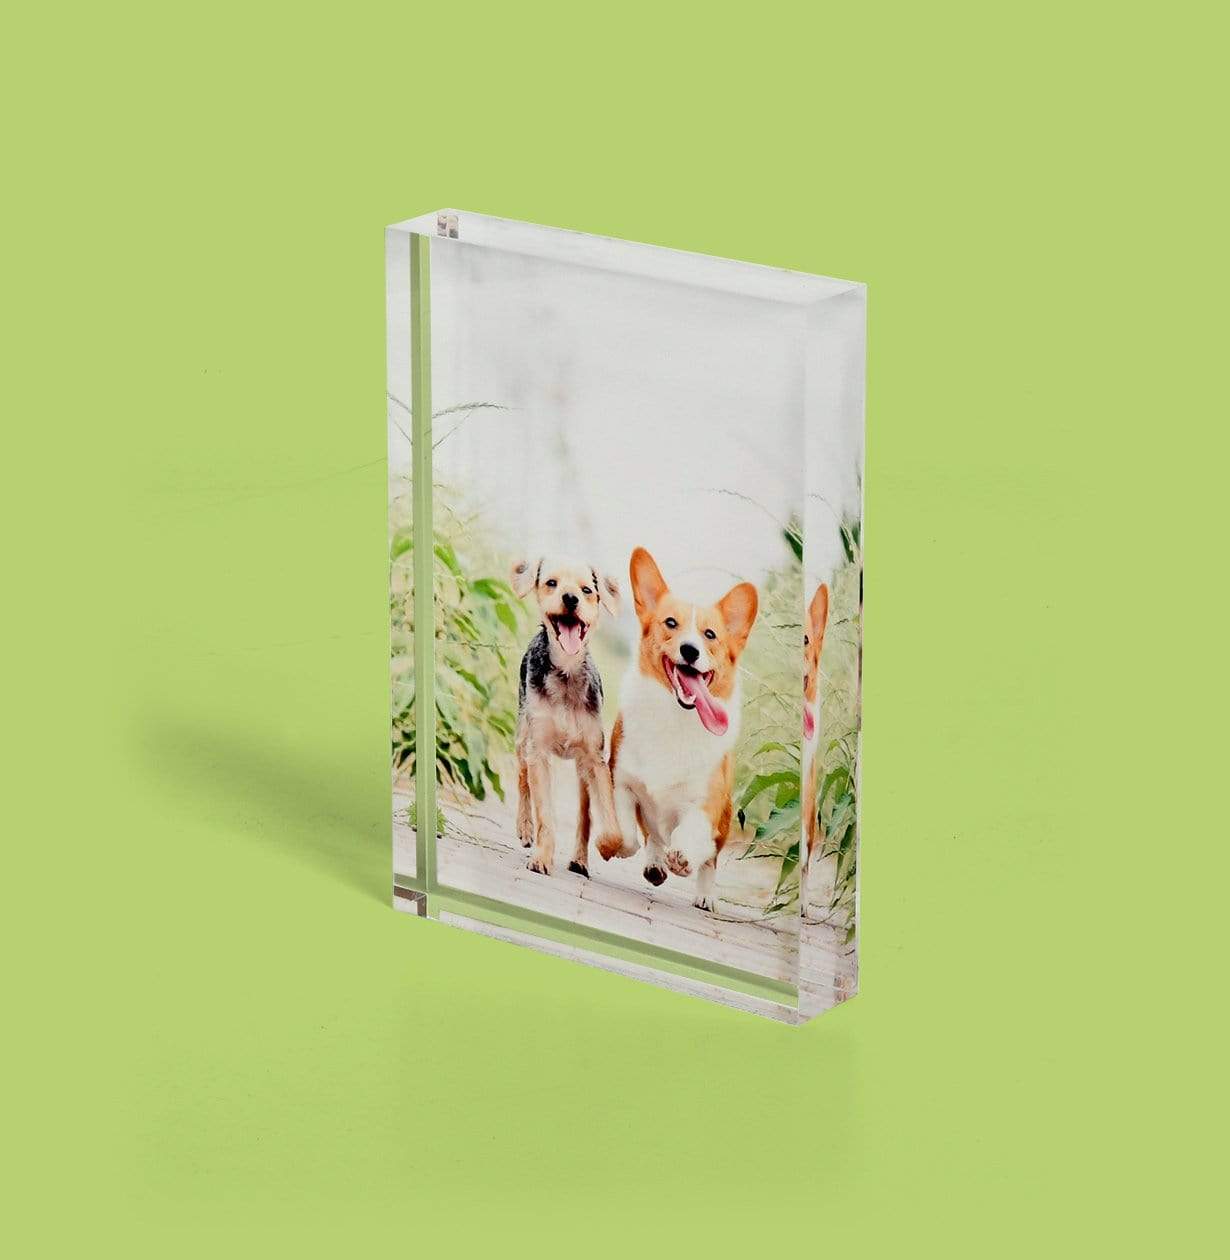 Pet Photo Printed on Acrylic Block - Desk Decor by Posterjack Canada